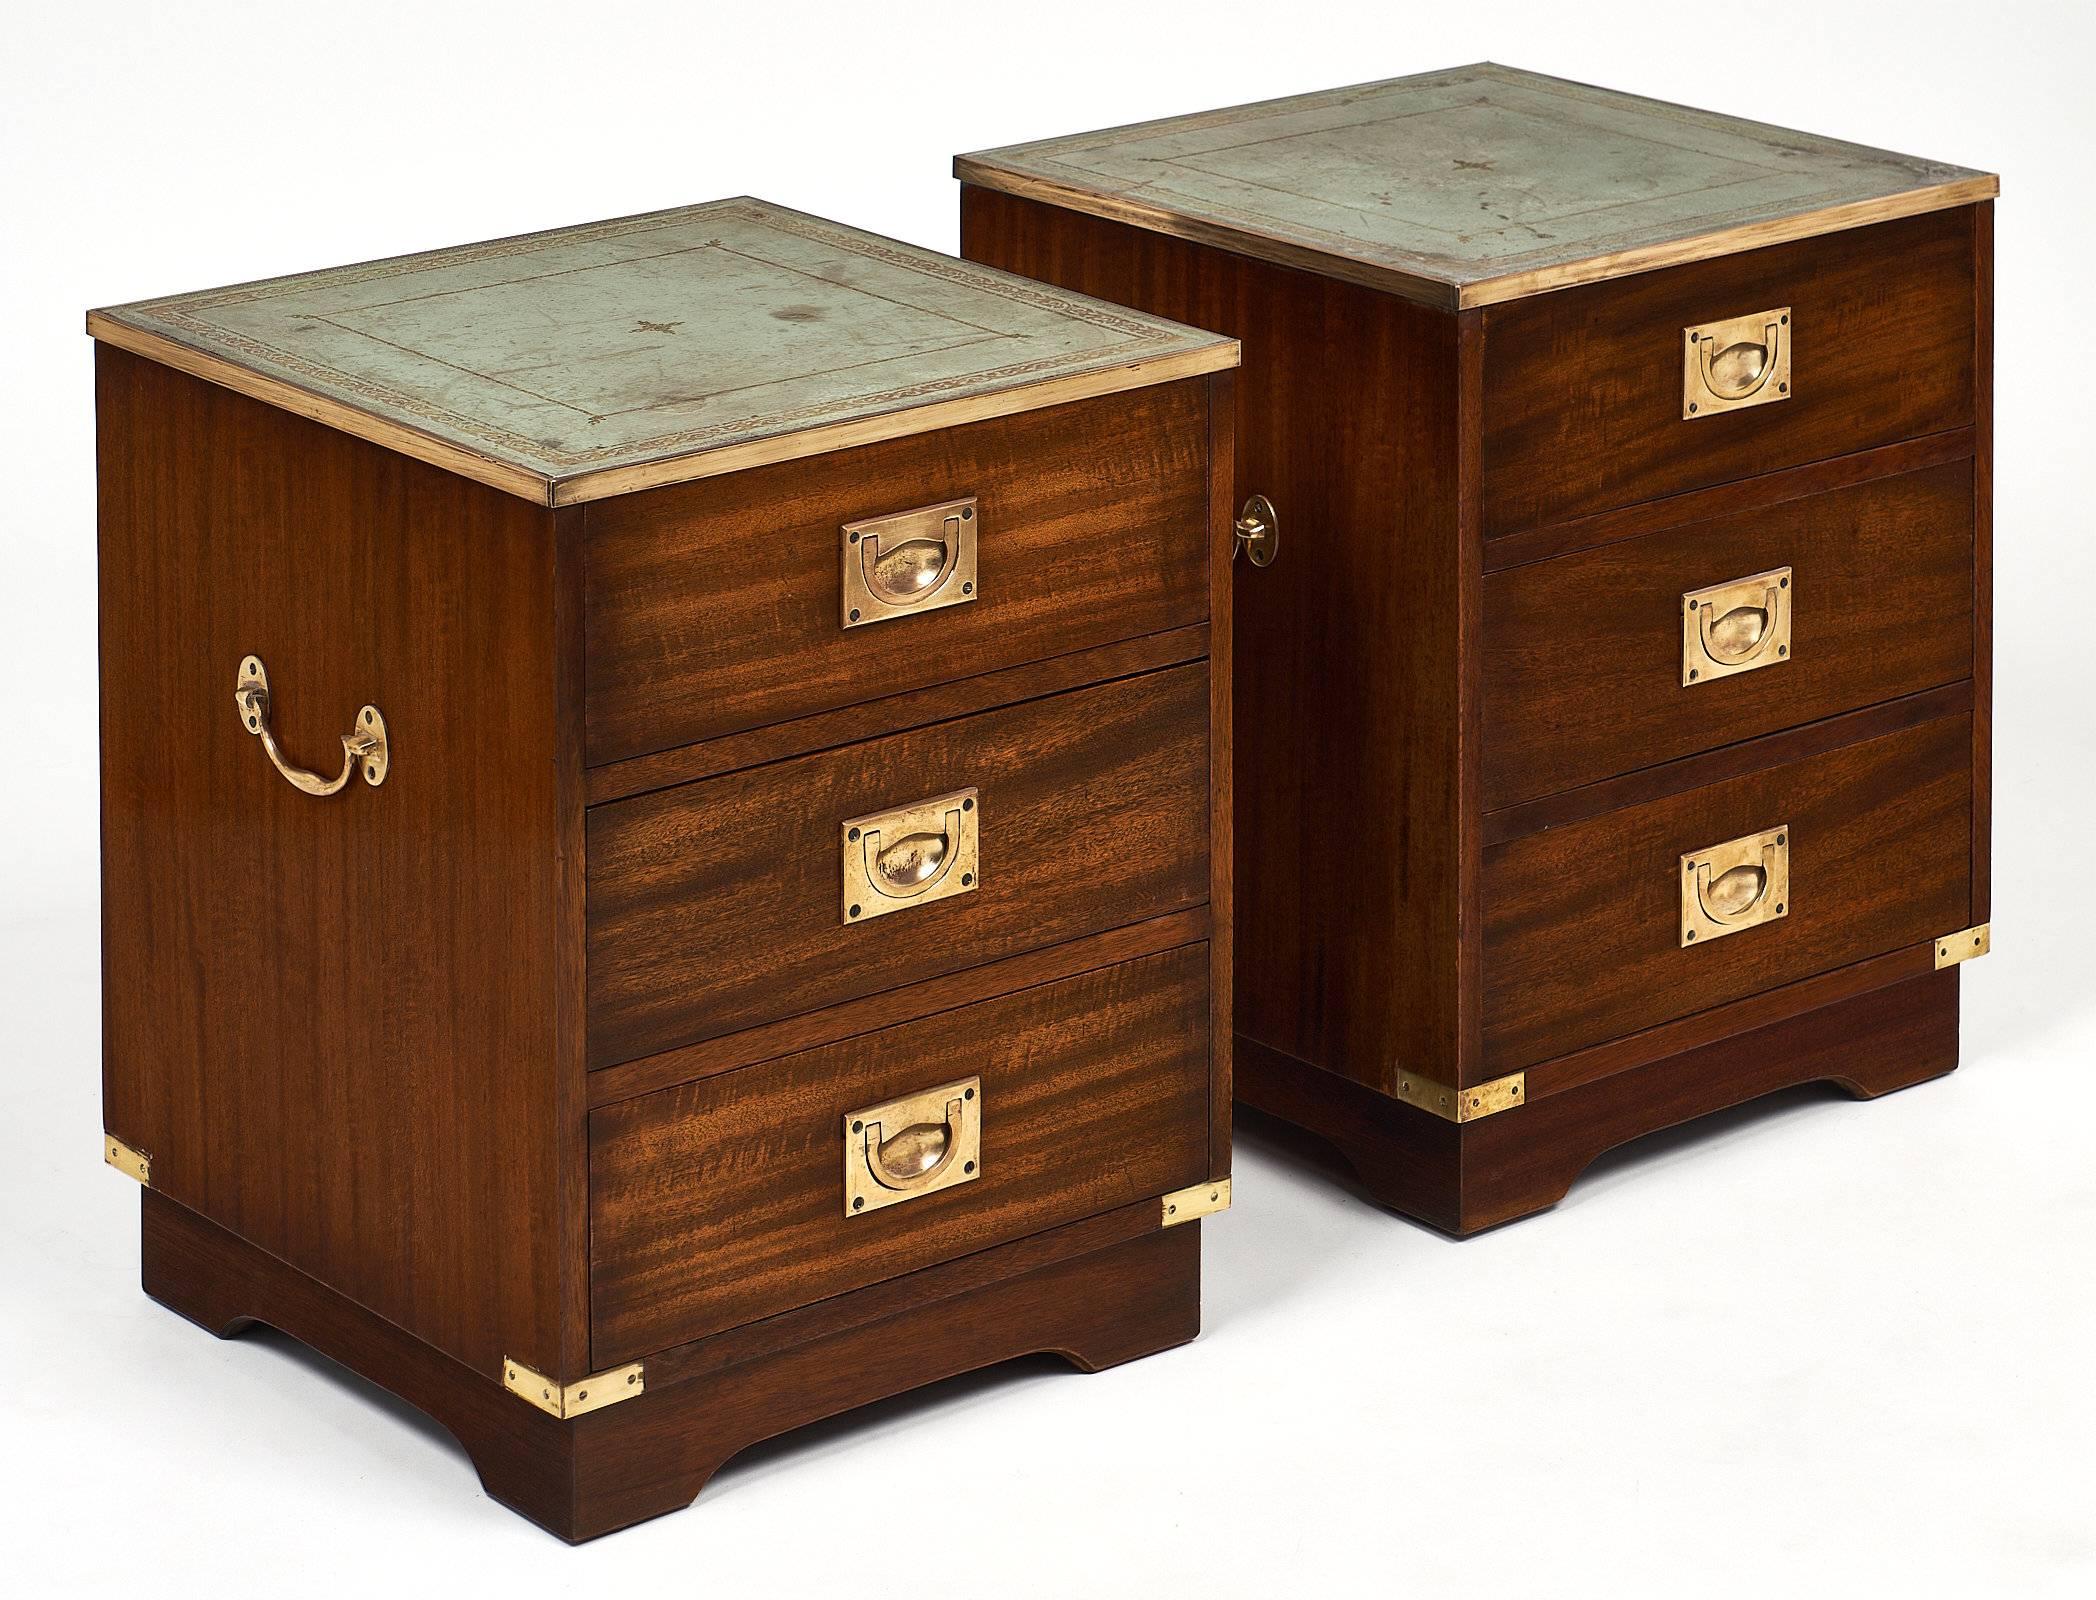 A fine vintage pair of English campaign chests made of mahogany and finished with a French polish for luster. They have green leather tops embossed with gold leafing. All of the brass trims and hardware are original. Each has three dovetailed